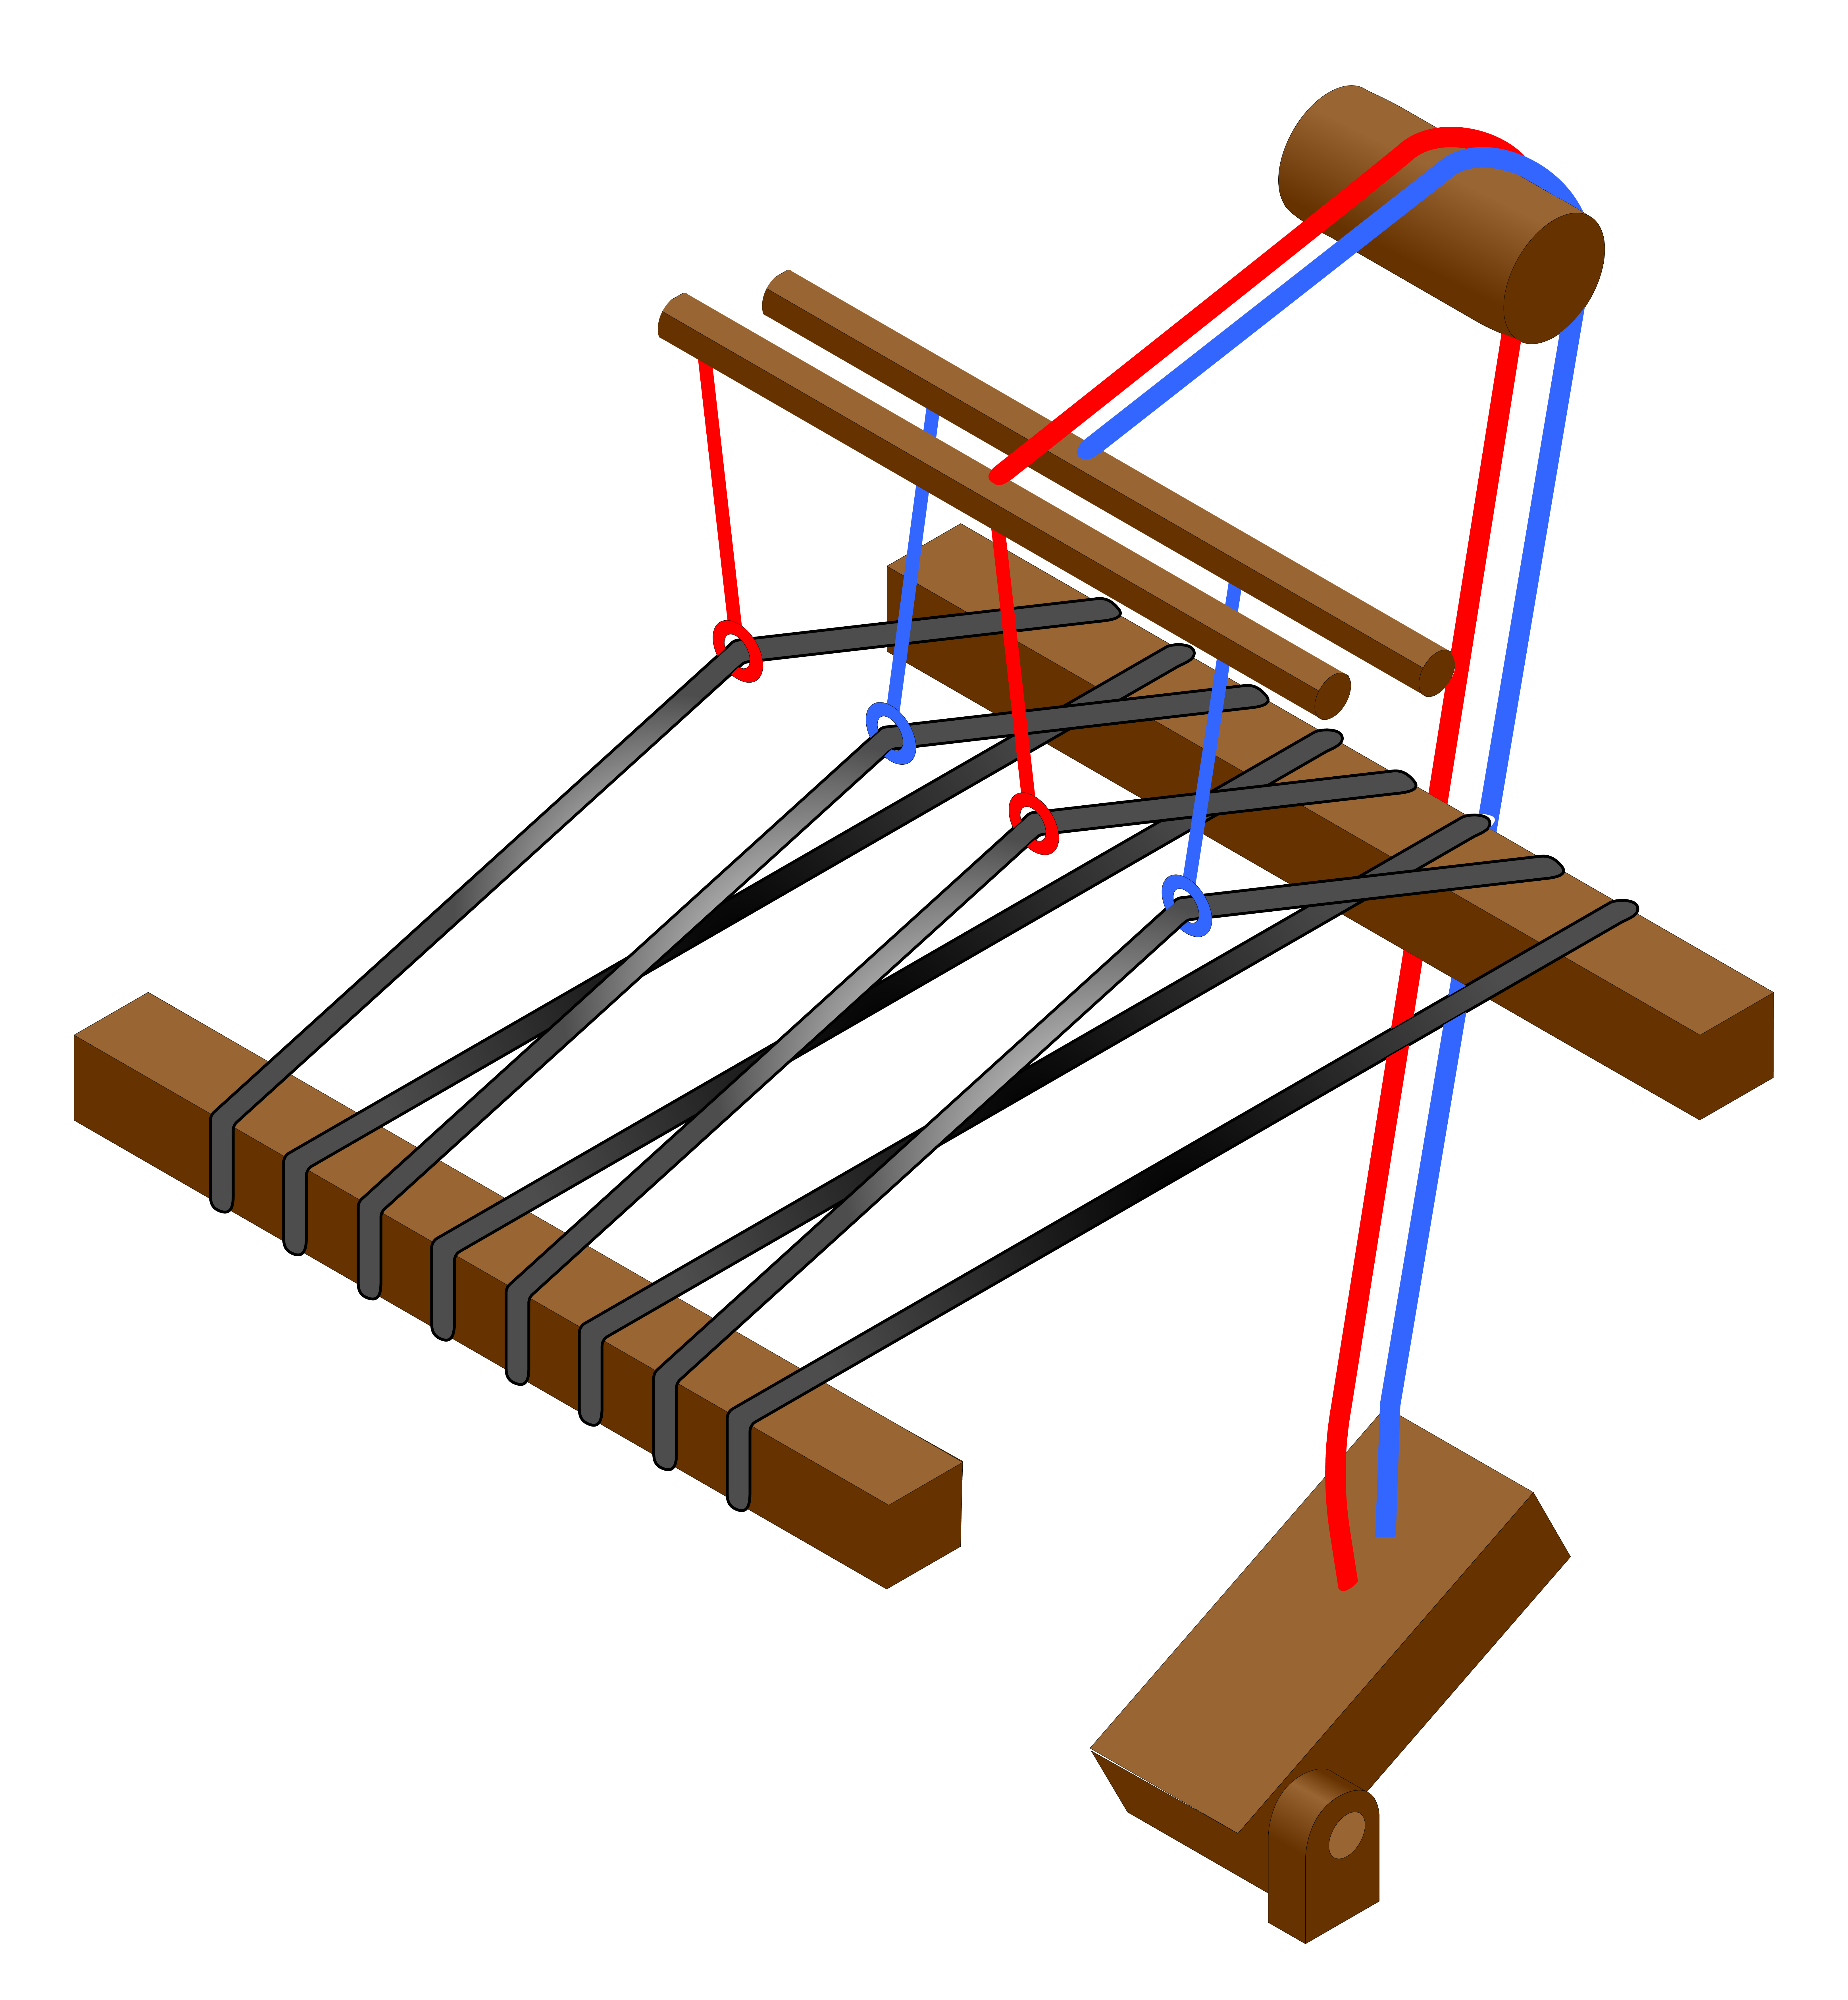 An illustration of a loom with two shafts that lift the same shed as the previous illustration. The two shafts have been tied to a treadle that lifts both of them.